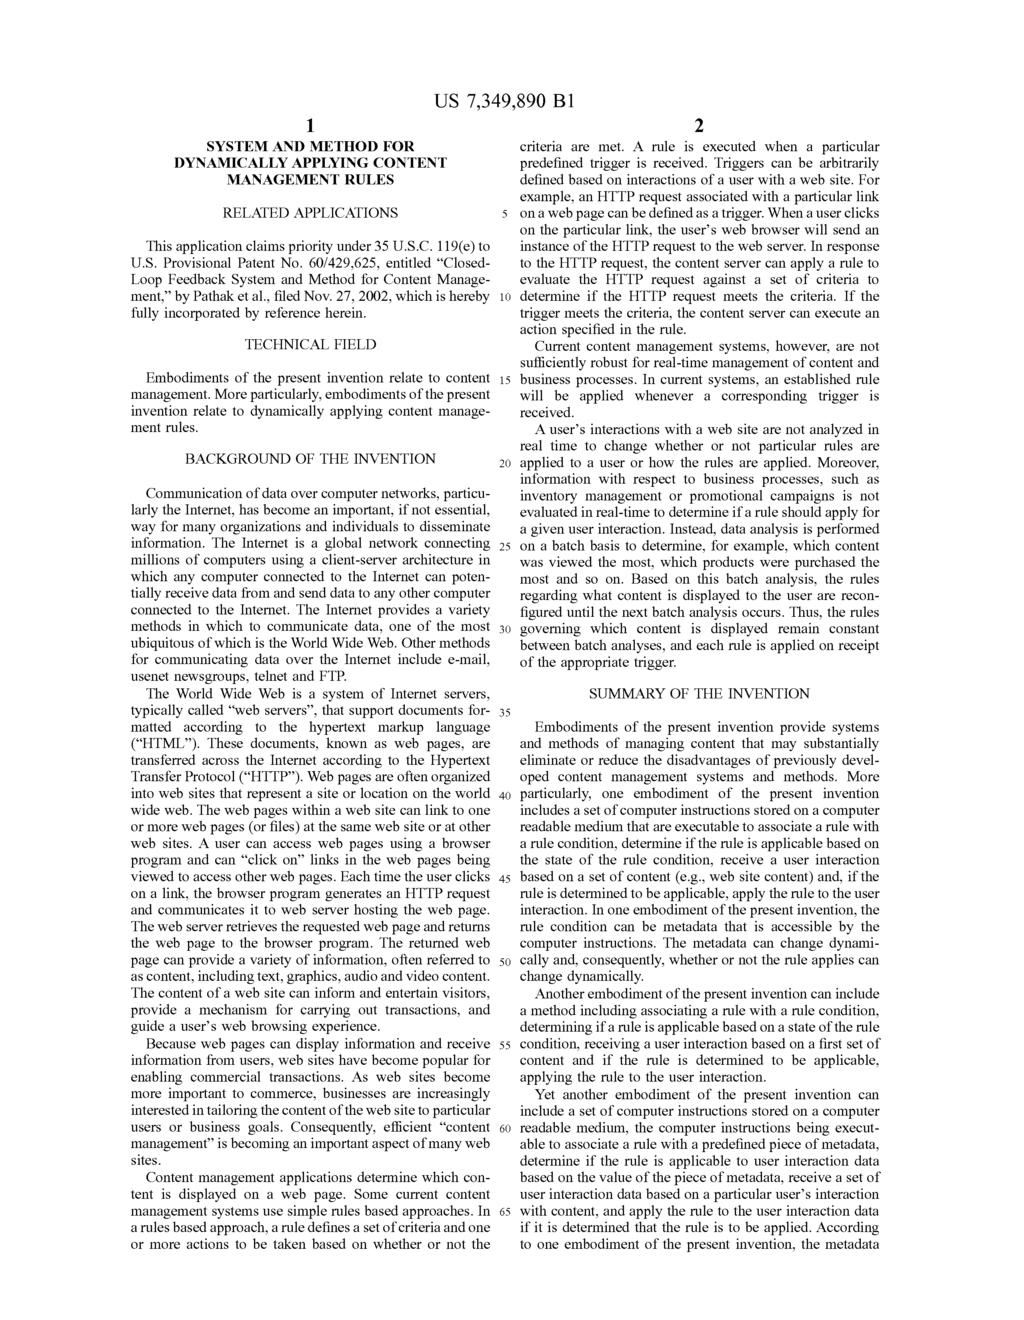 1. SYSTEMAND METHOD FOR DYNAMICALLY APPLYING CONTENT MANAGEMENT RULES RELATED APPLICATIONS This application claims priority under U.S.C. 119(e) to U.S. Provisional Patent No.